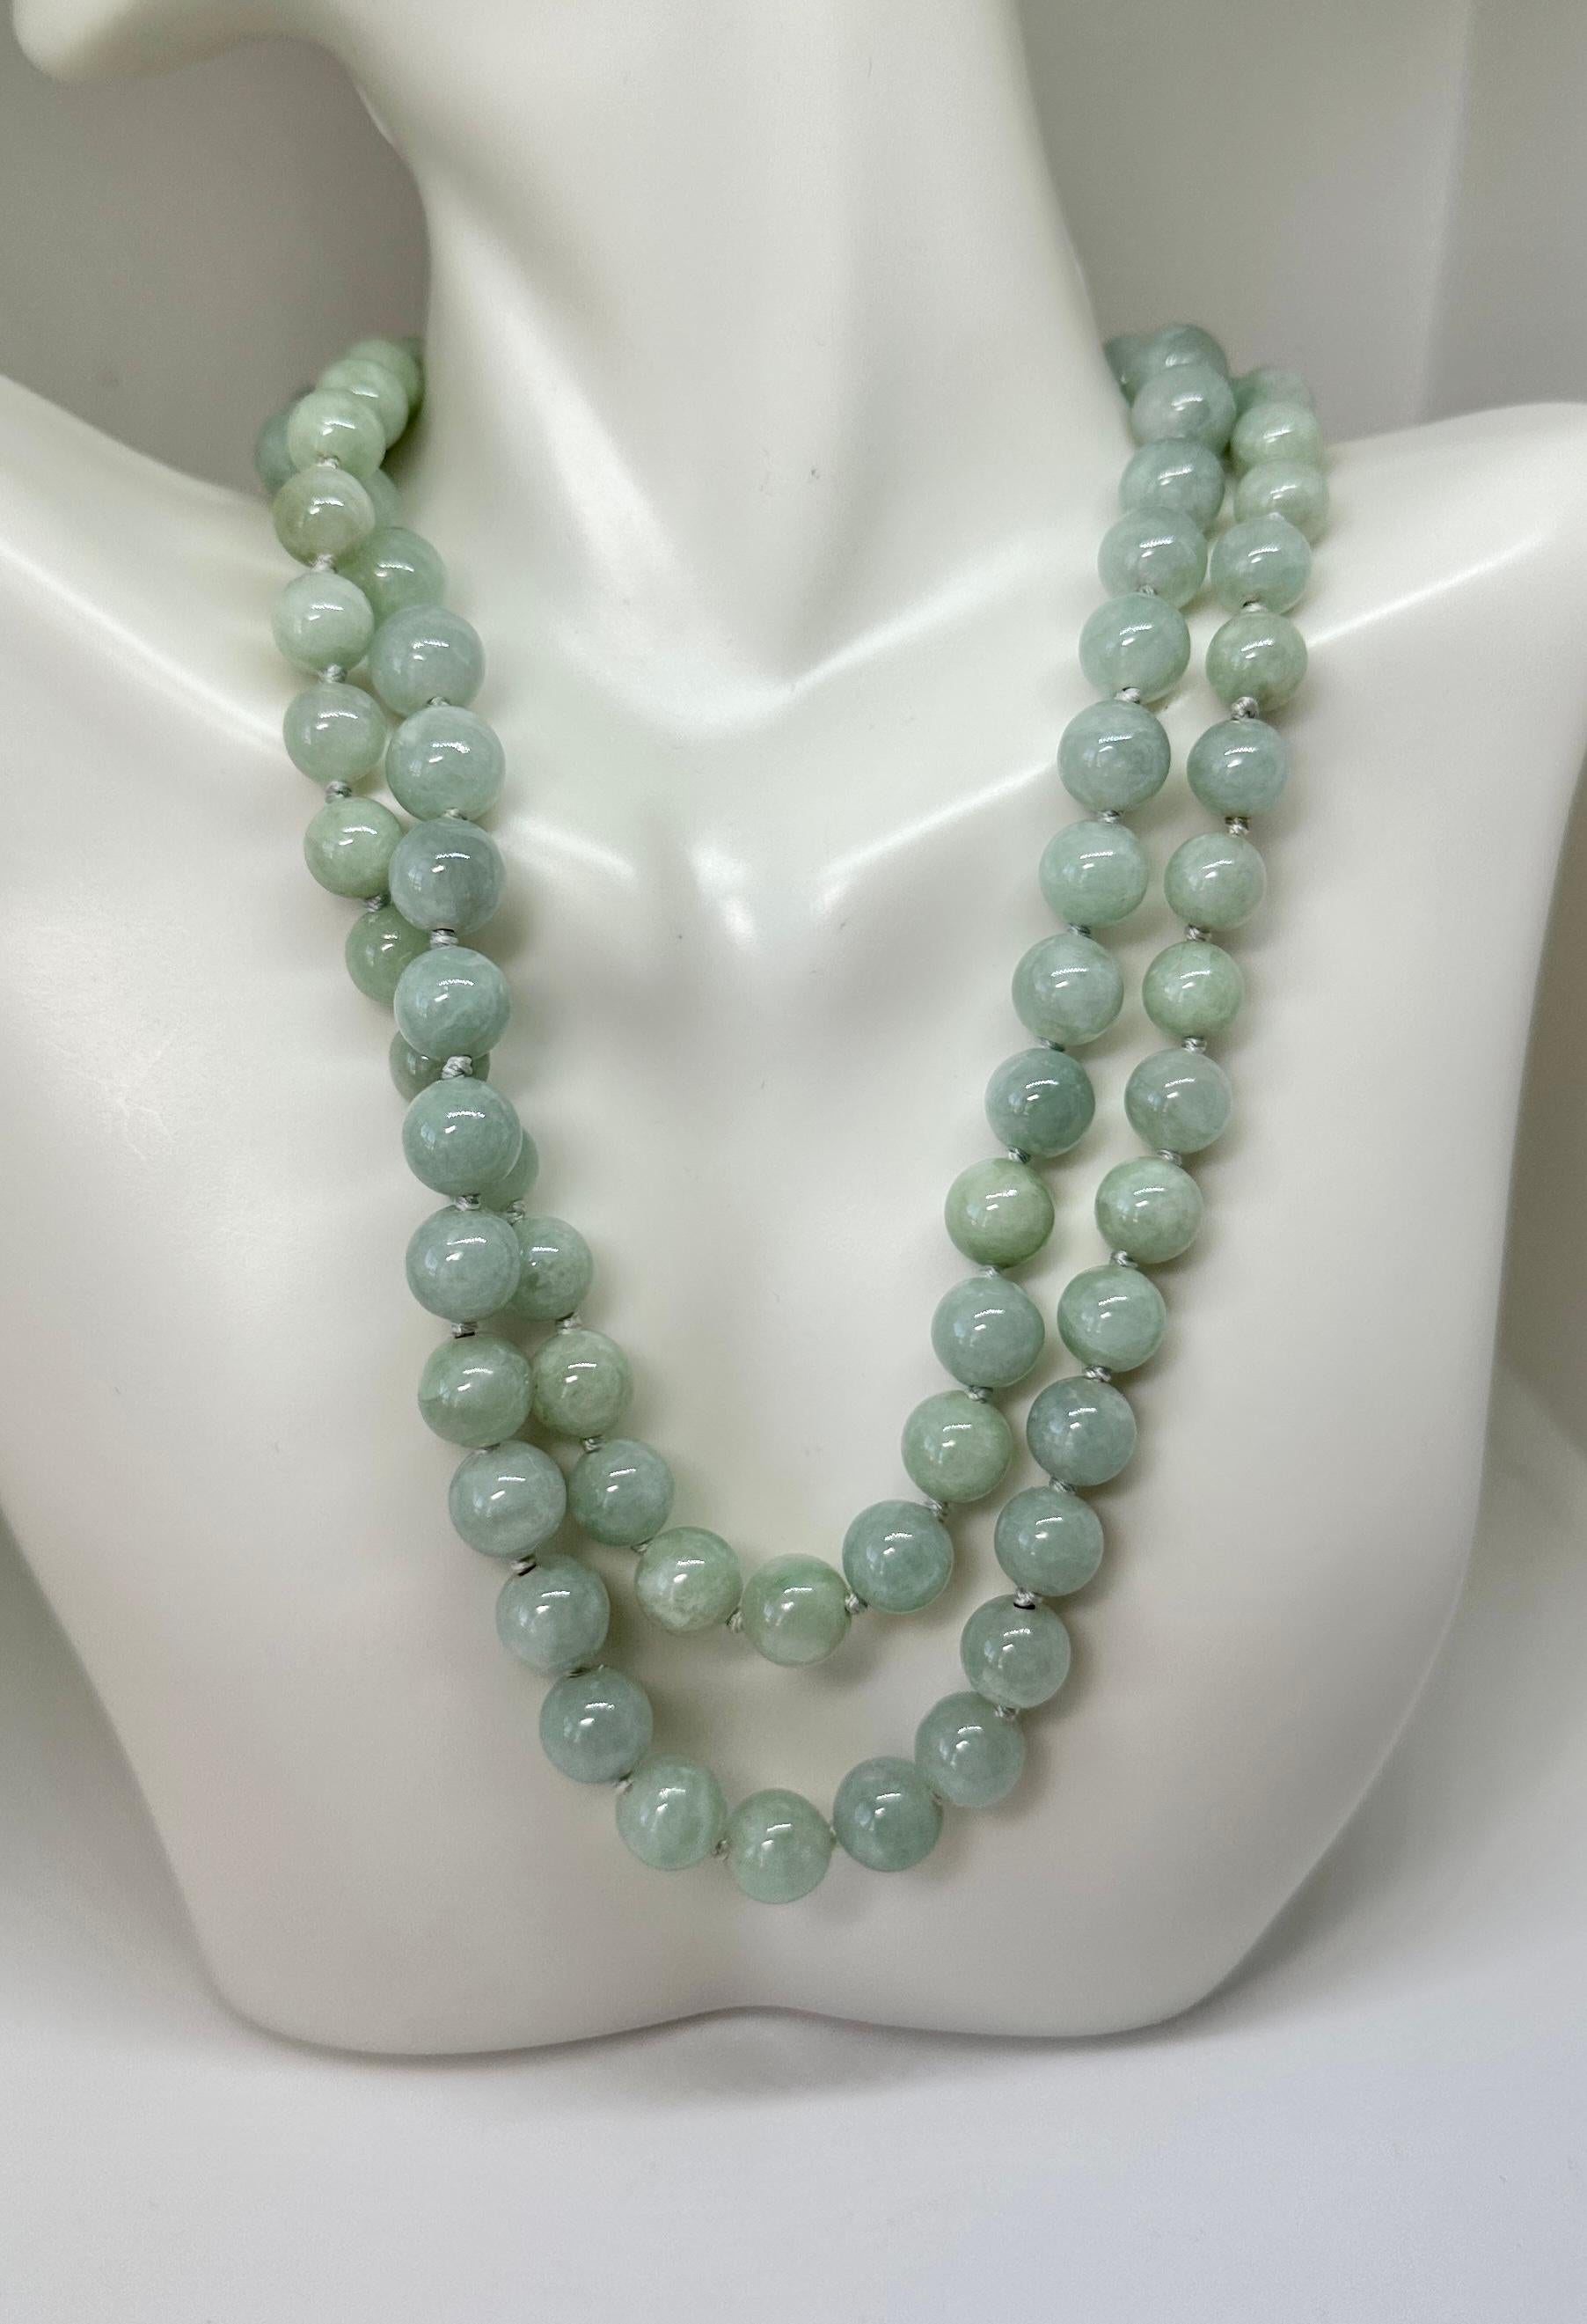 THIS IS AN EXQUISITE ART DECO JADE AND 14 KARAT YELLOW GOLD BEAD NECKLACE OF 30 INCHES IN LENGTH.  THE STUNNING NECKLACE HAS GORGEOUS 10MM JADE BEADS WITH A WONDERFUL 14 KARAT YELLOW GOLD FLOWER MOTIF CLASP.  EACH BEAD IS INDIVIDUALLY KNOTTED.  THE